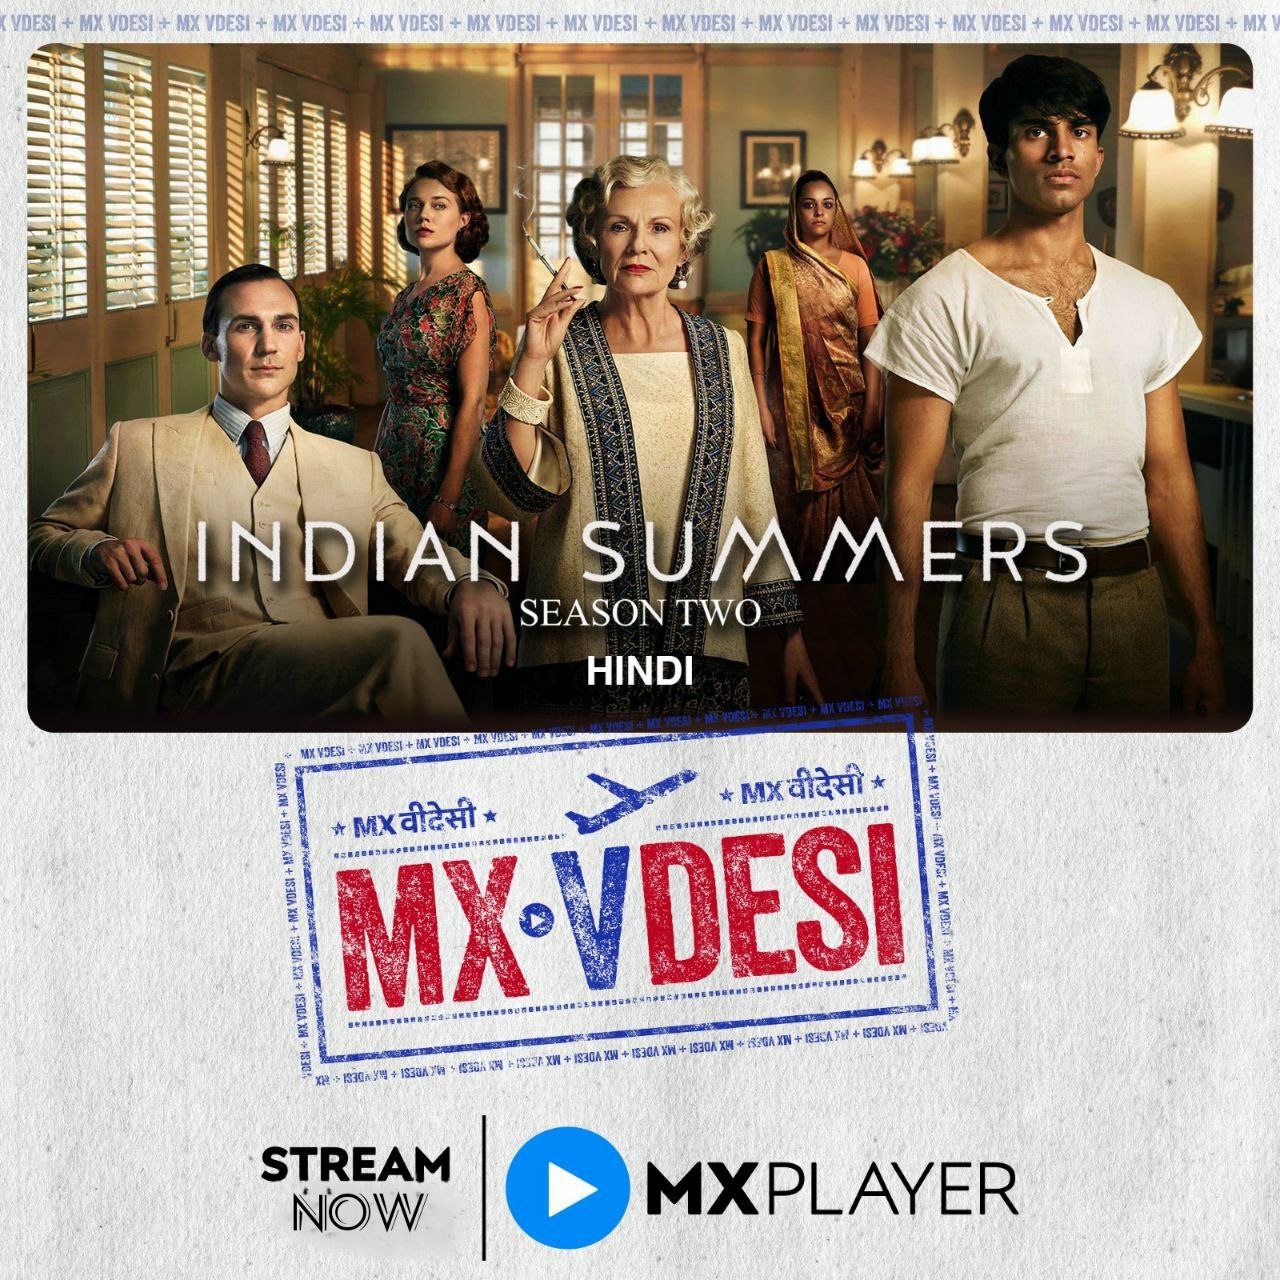 India Summer Web Series on MX Player in Hindi